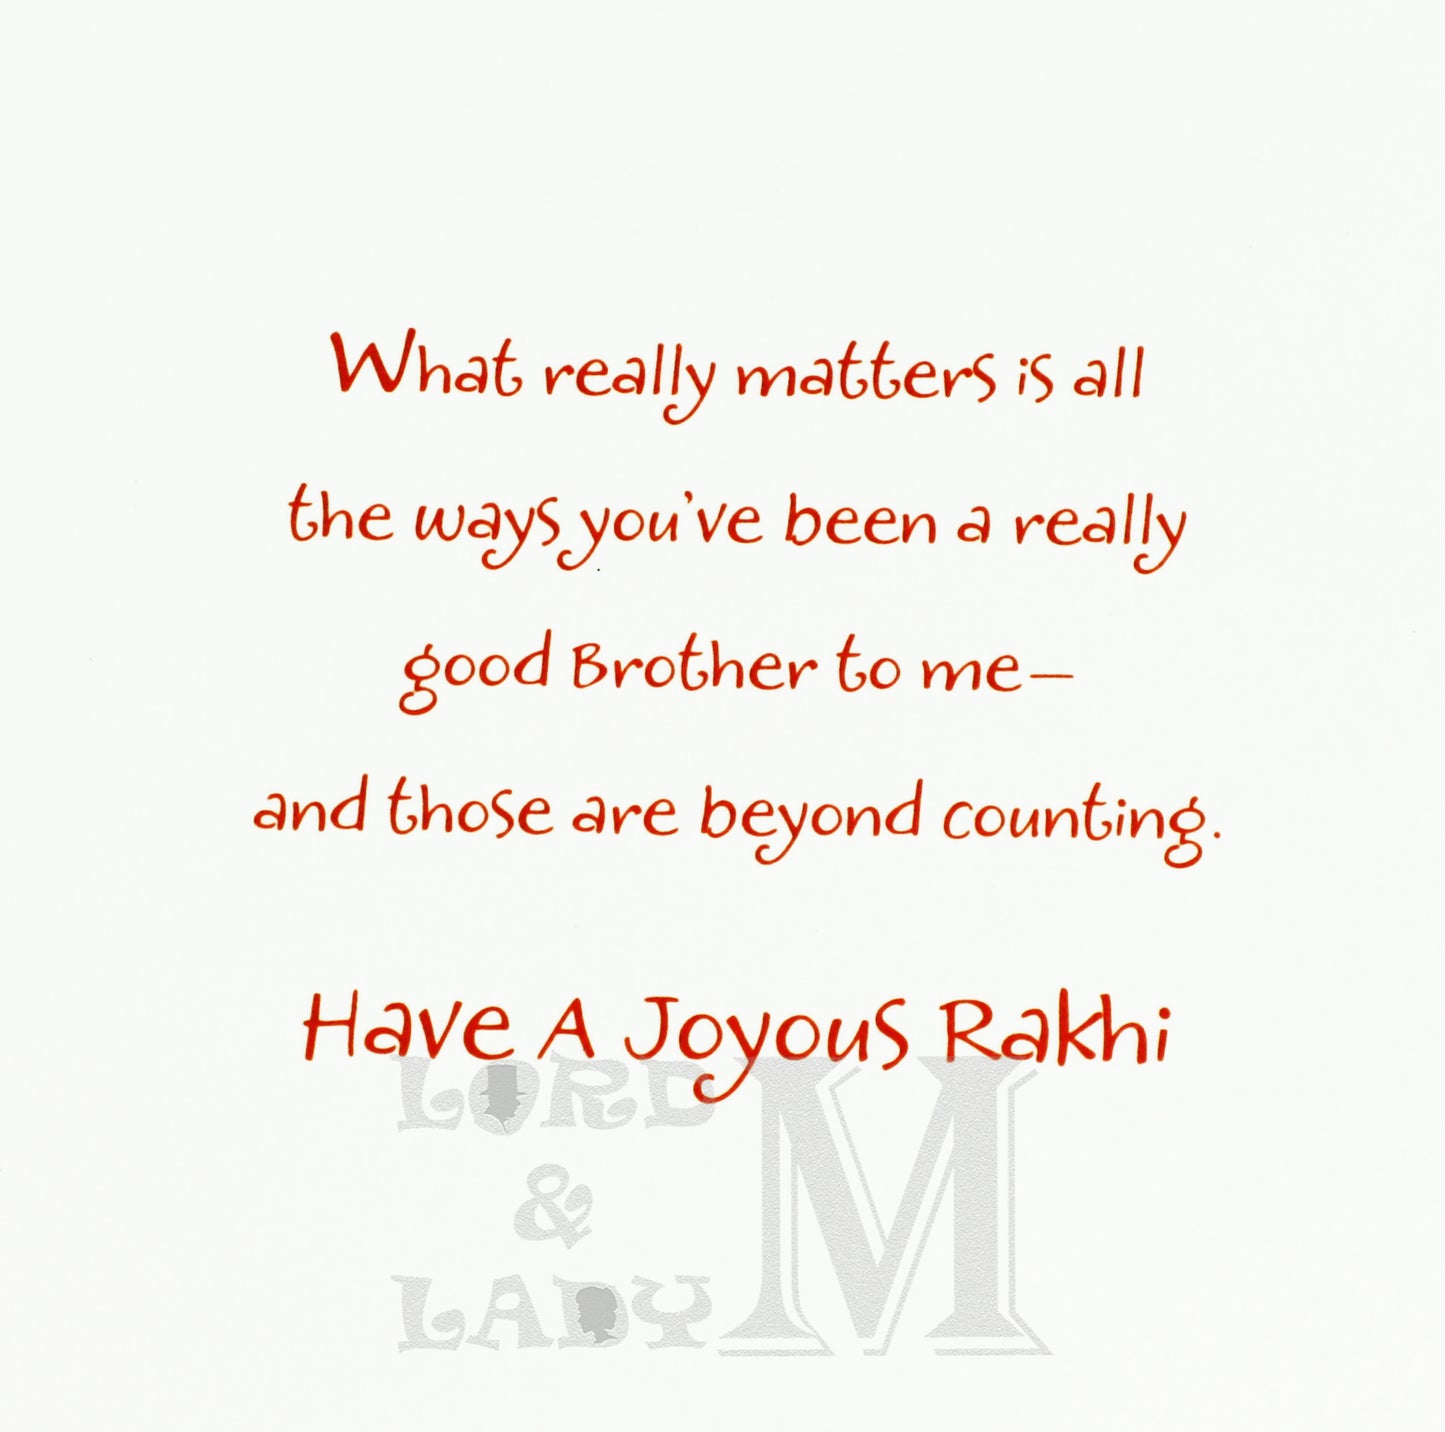 15cm - Rakhi Wishes For A Special Brother .. - DV